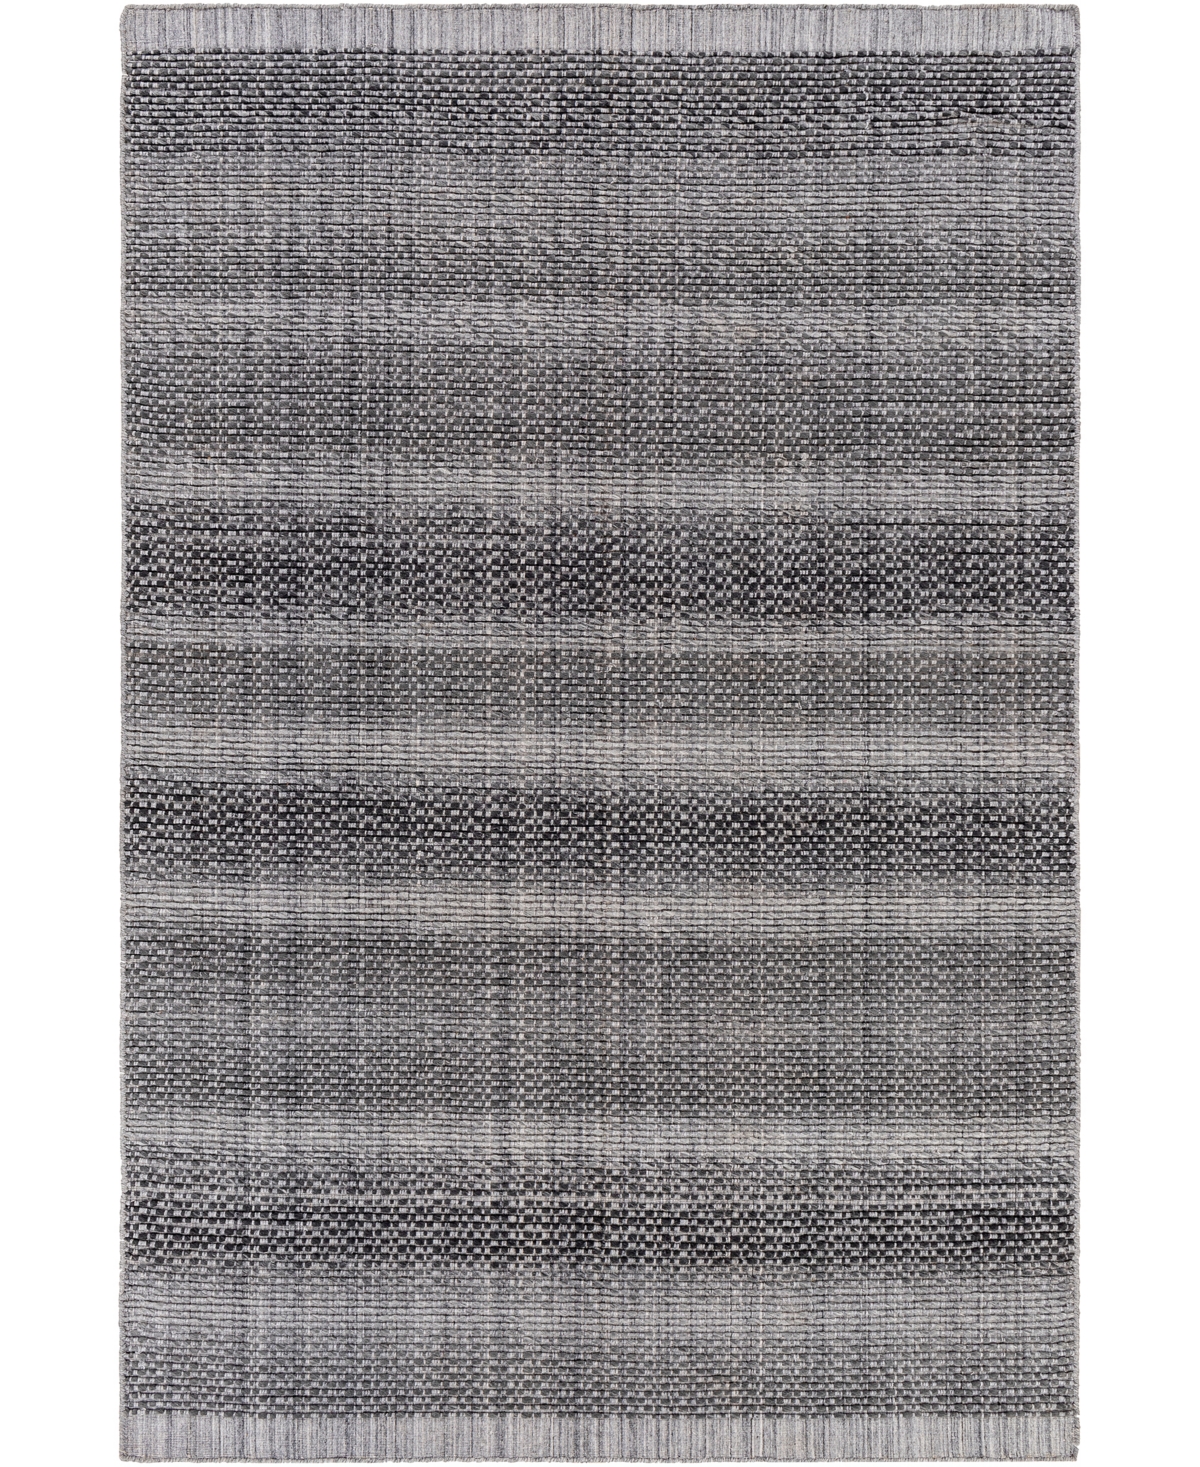 Surya Sycamore Syc-2301 9in x 12' Outdoor Area Rug - Charcoal